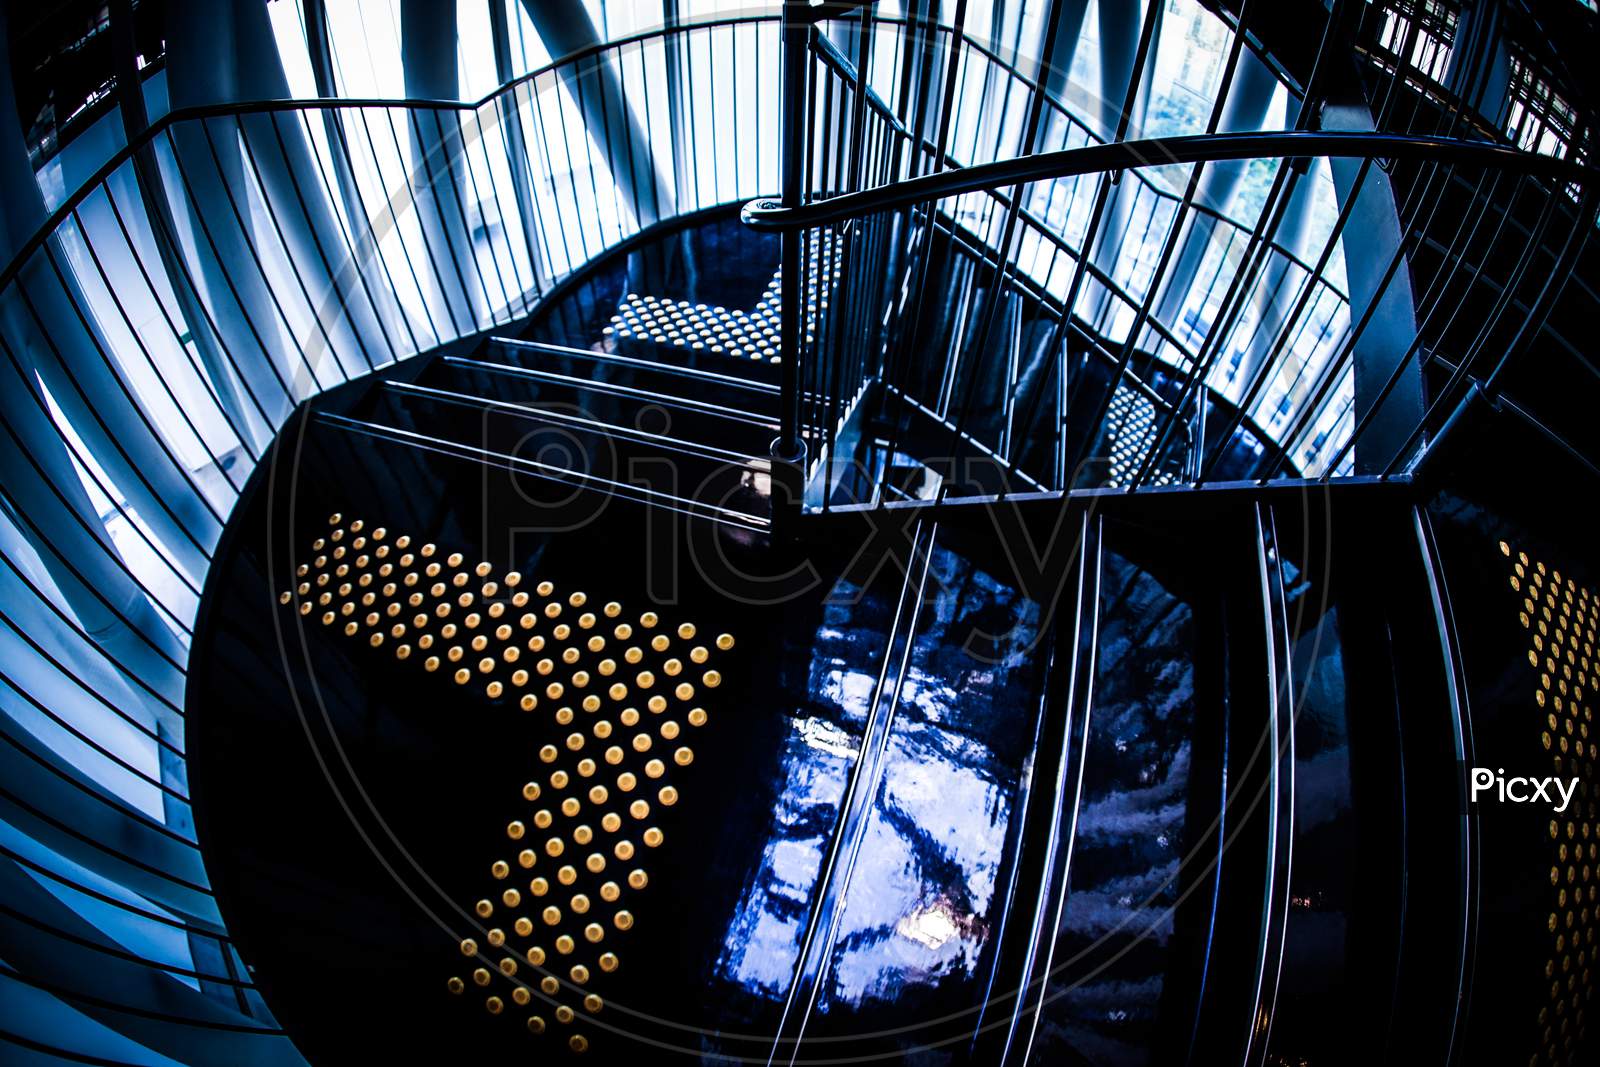 Image Of Spiral Stairs